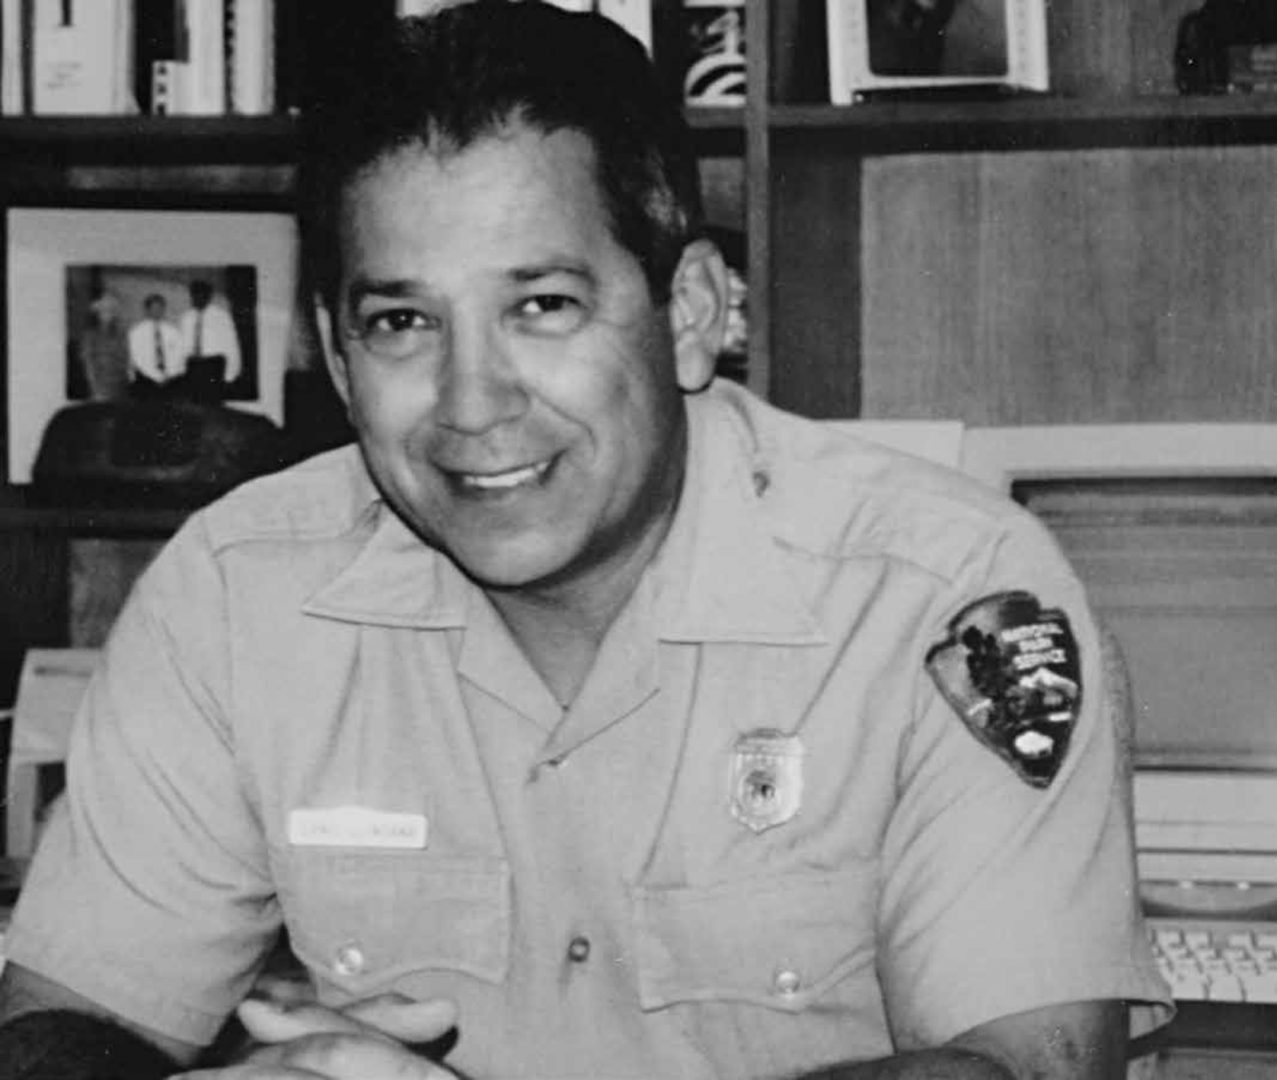 Black and white photograph of Ernest Quintana in National Park Service uniform indoors, seated at desk